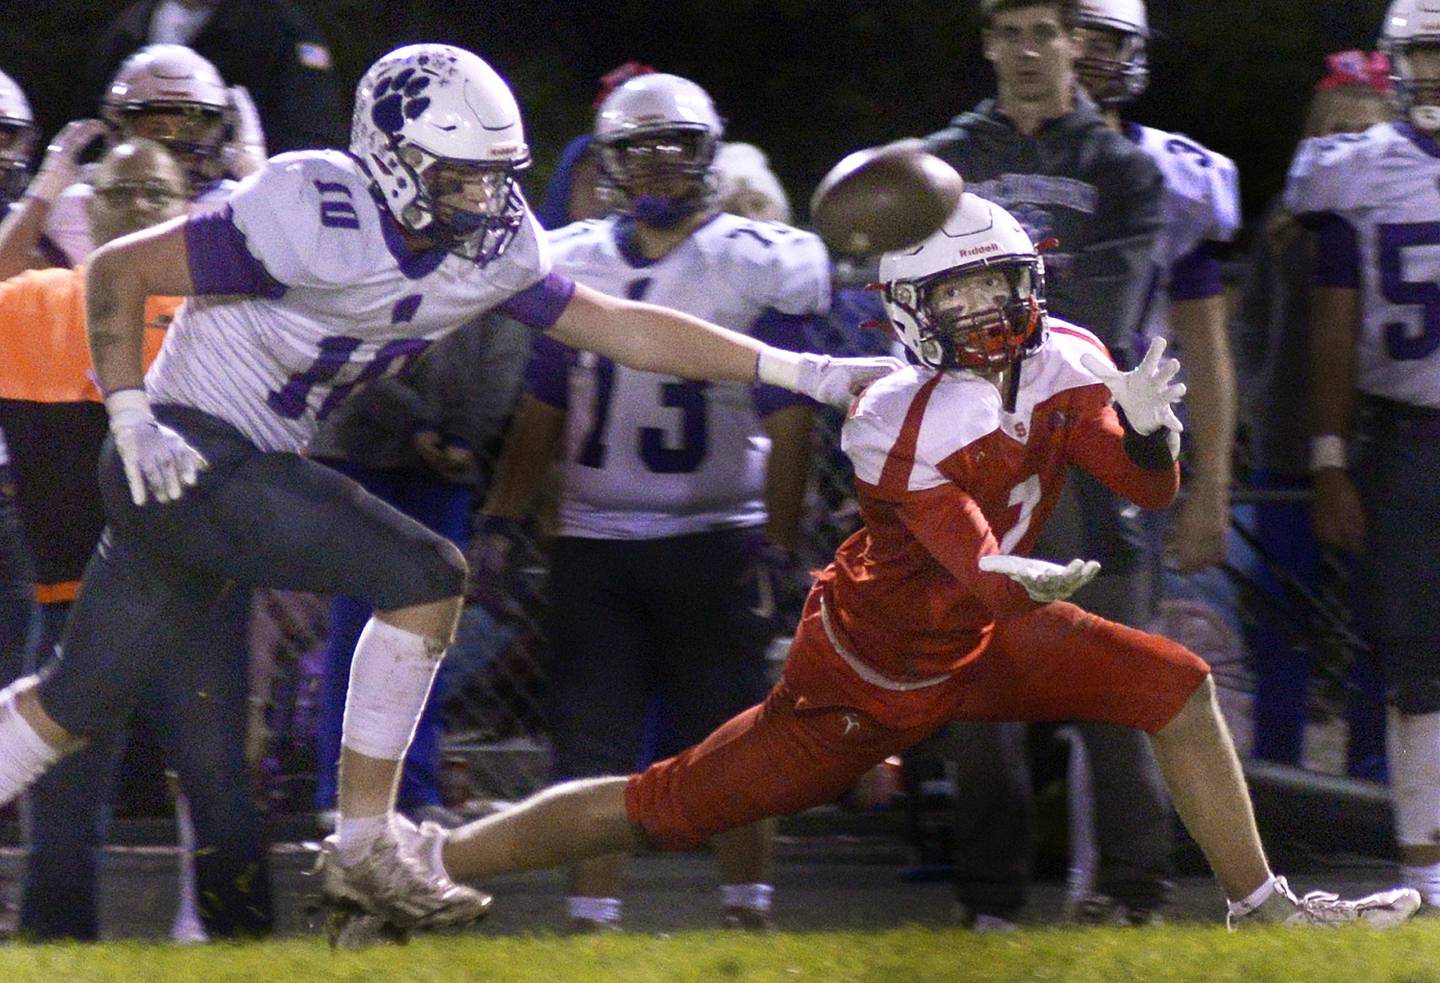 Streator’s Matt Williamson (7) extends to haul in a pass as Wilmington’s Reid Juster (10) defends Friday, Oct. 20., 2023, in Streator.